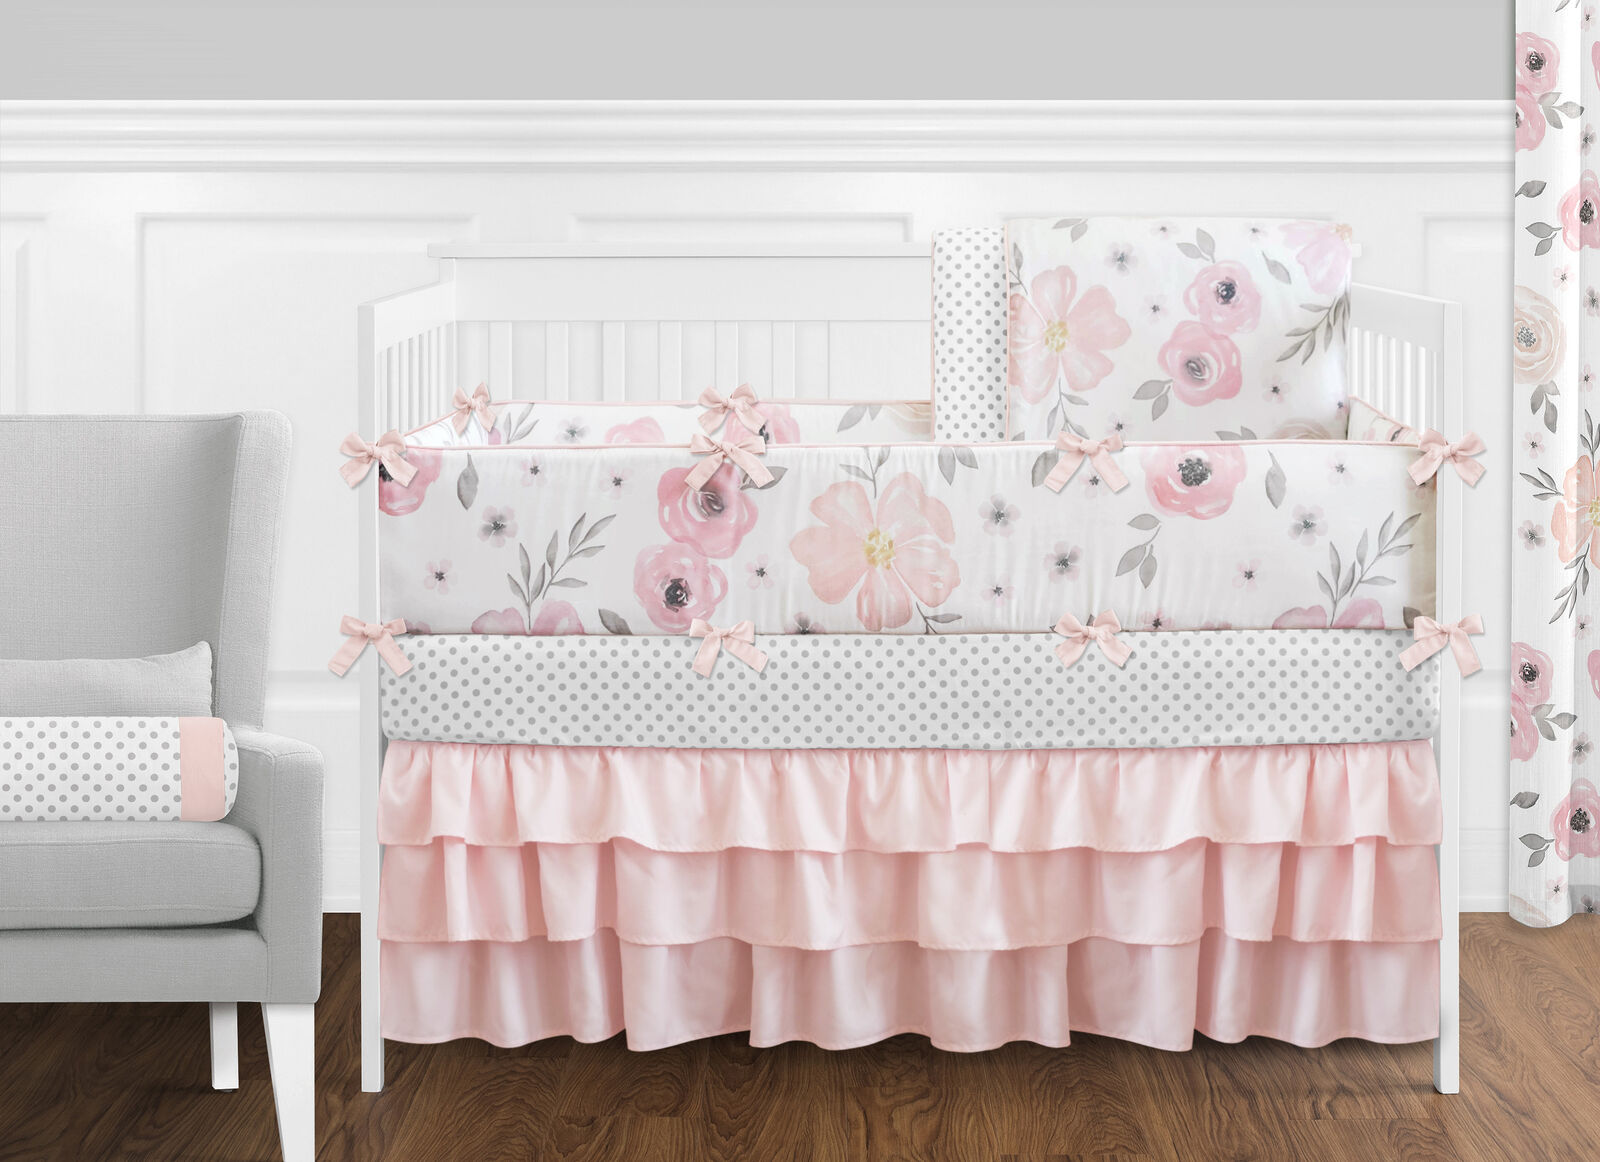 Jojo Shabby Chic Blush Pink Gray Floral Watercolor Girl Baby Bedding Crib Set For Sale Online